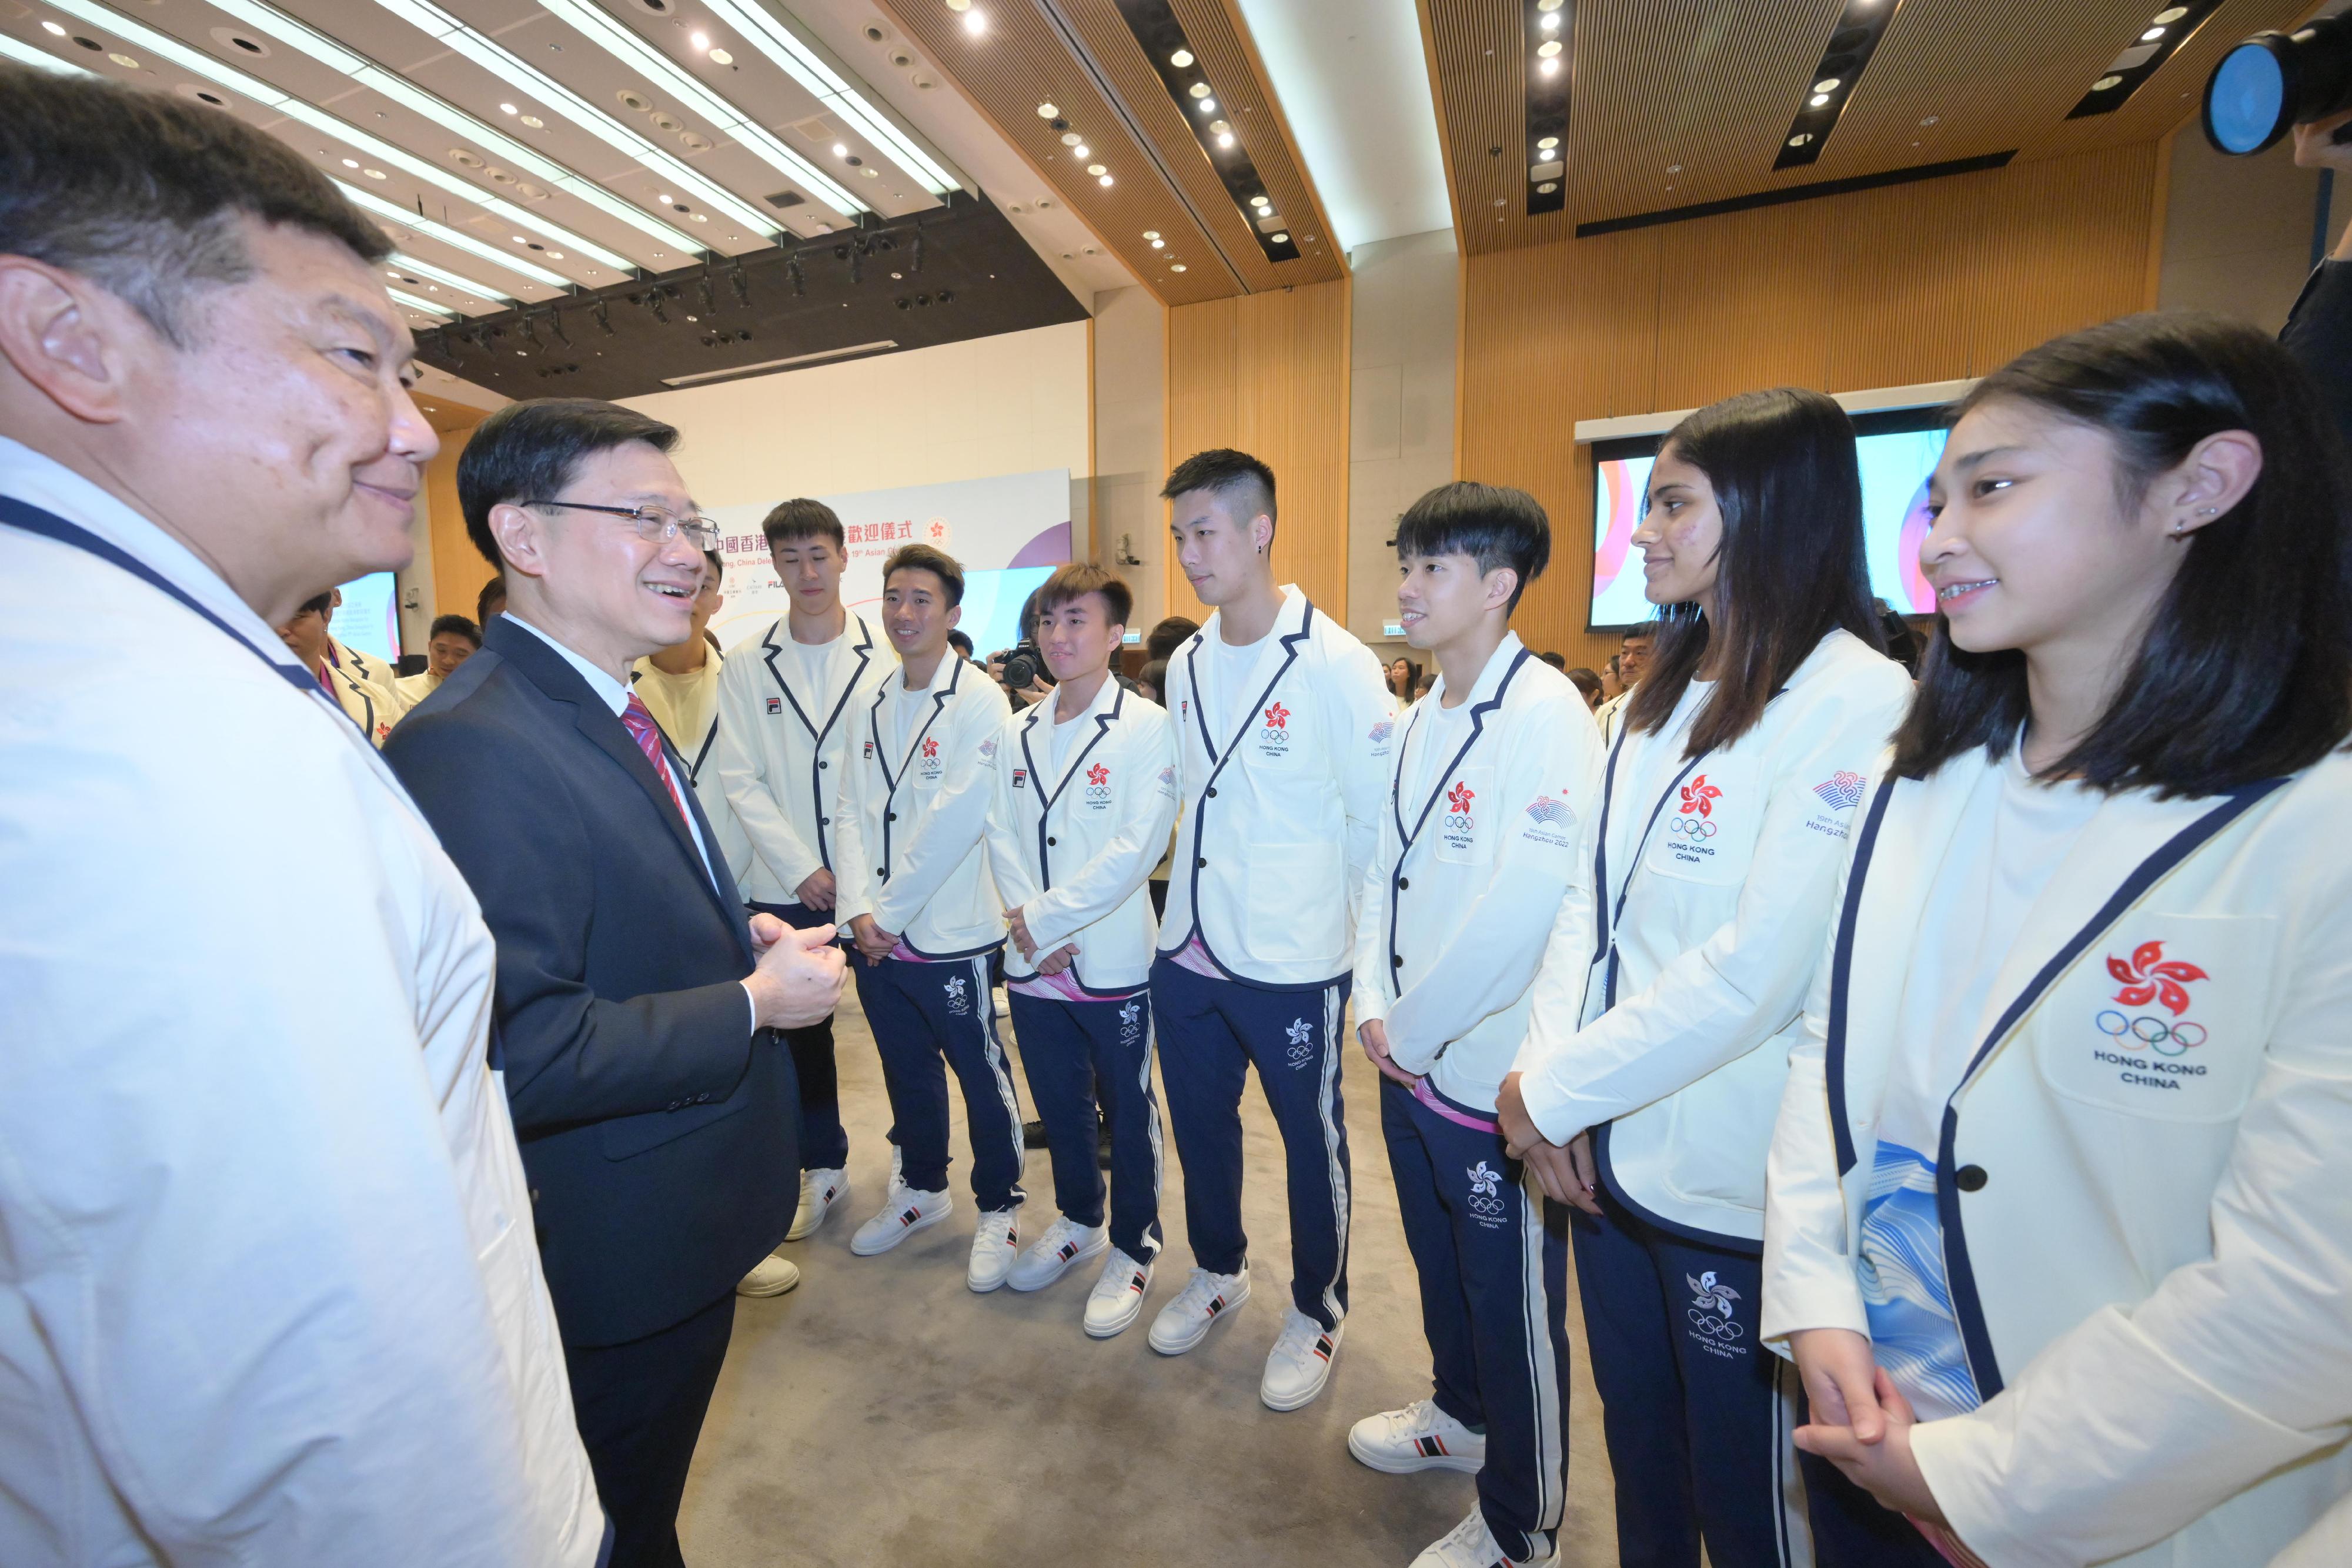 The Chief Executive, Mr John Lee, attended the welcome home reception for the Hong Kong, China Delegation to the 19th Asian Games Hangzhou today (October 14). Photo shows Mr Lee (second left) interacting with athletes.